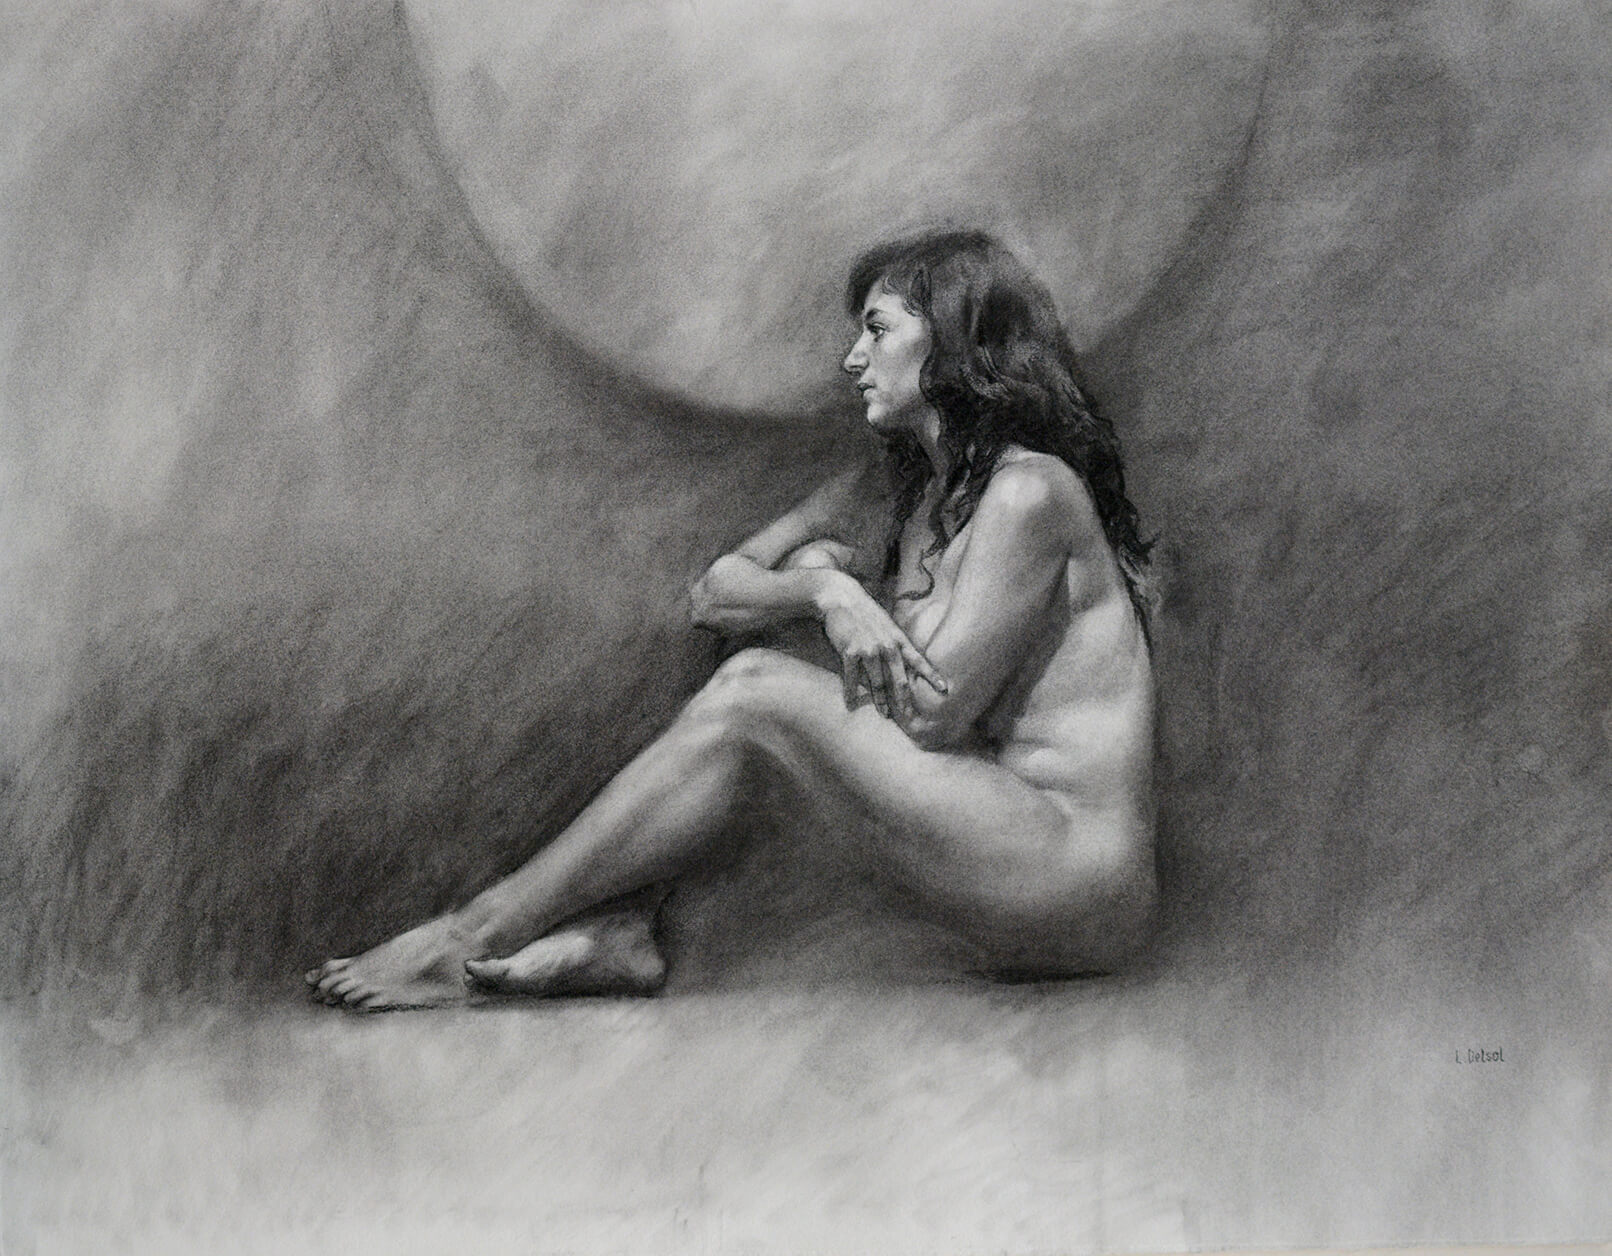 Realistic charcoal portrait of a nude woman sitting in profile with her arms crossed